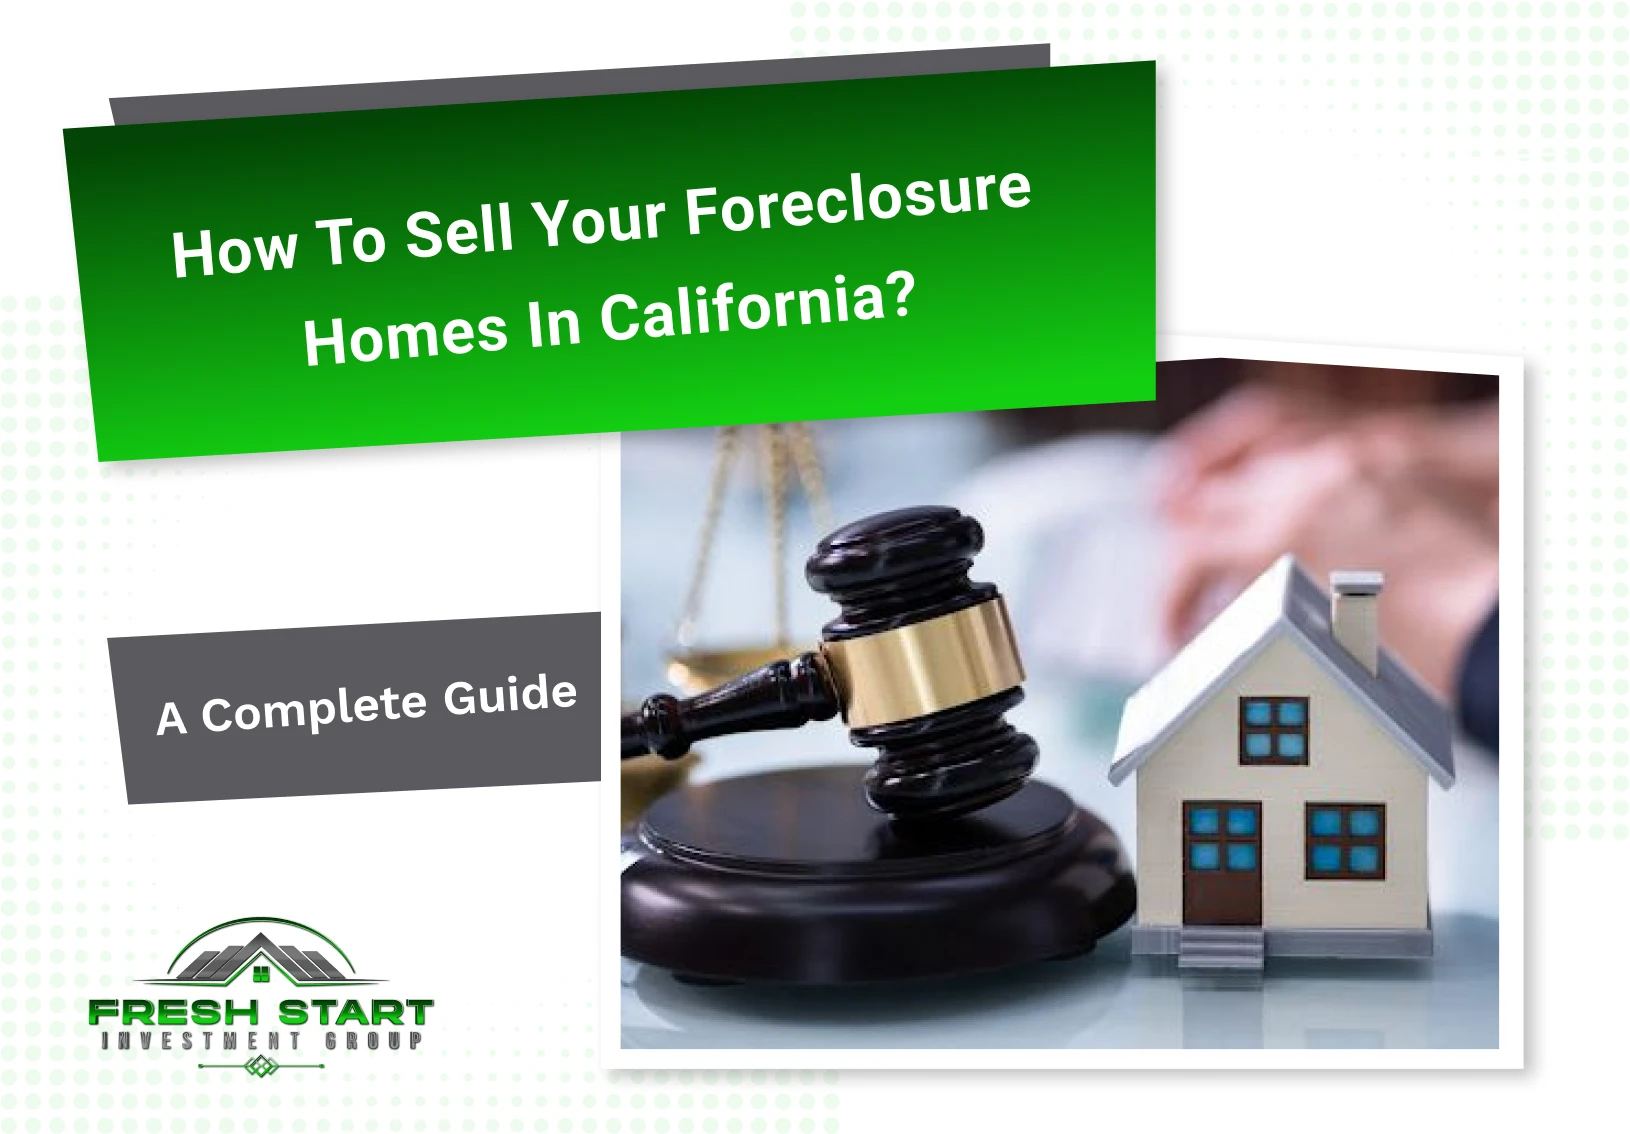 How To Sell Your foreclosure homes in California?